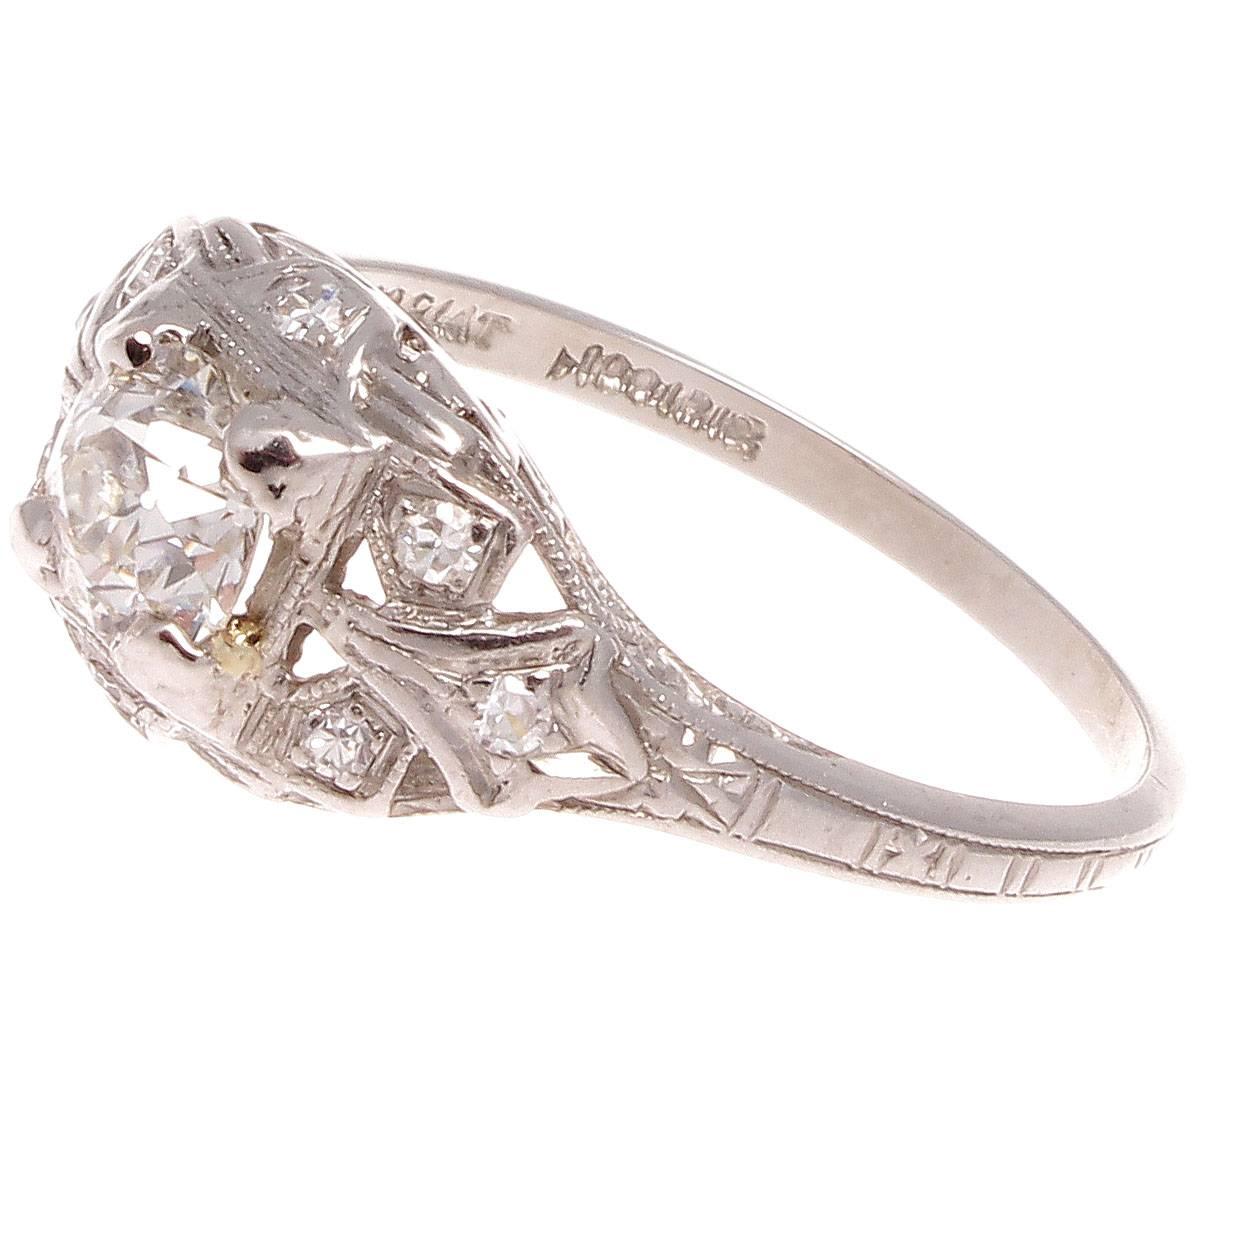 Beautifully crafted art deco ring that features symmetry and geometric shapes to create this picturesque design. Featuring an approximately 0.50 carat old european cut center diamond accented by numerous near colorless diamonds. Hand crafted in